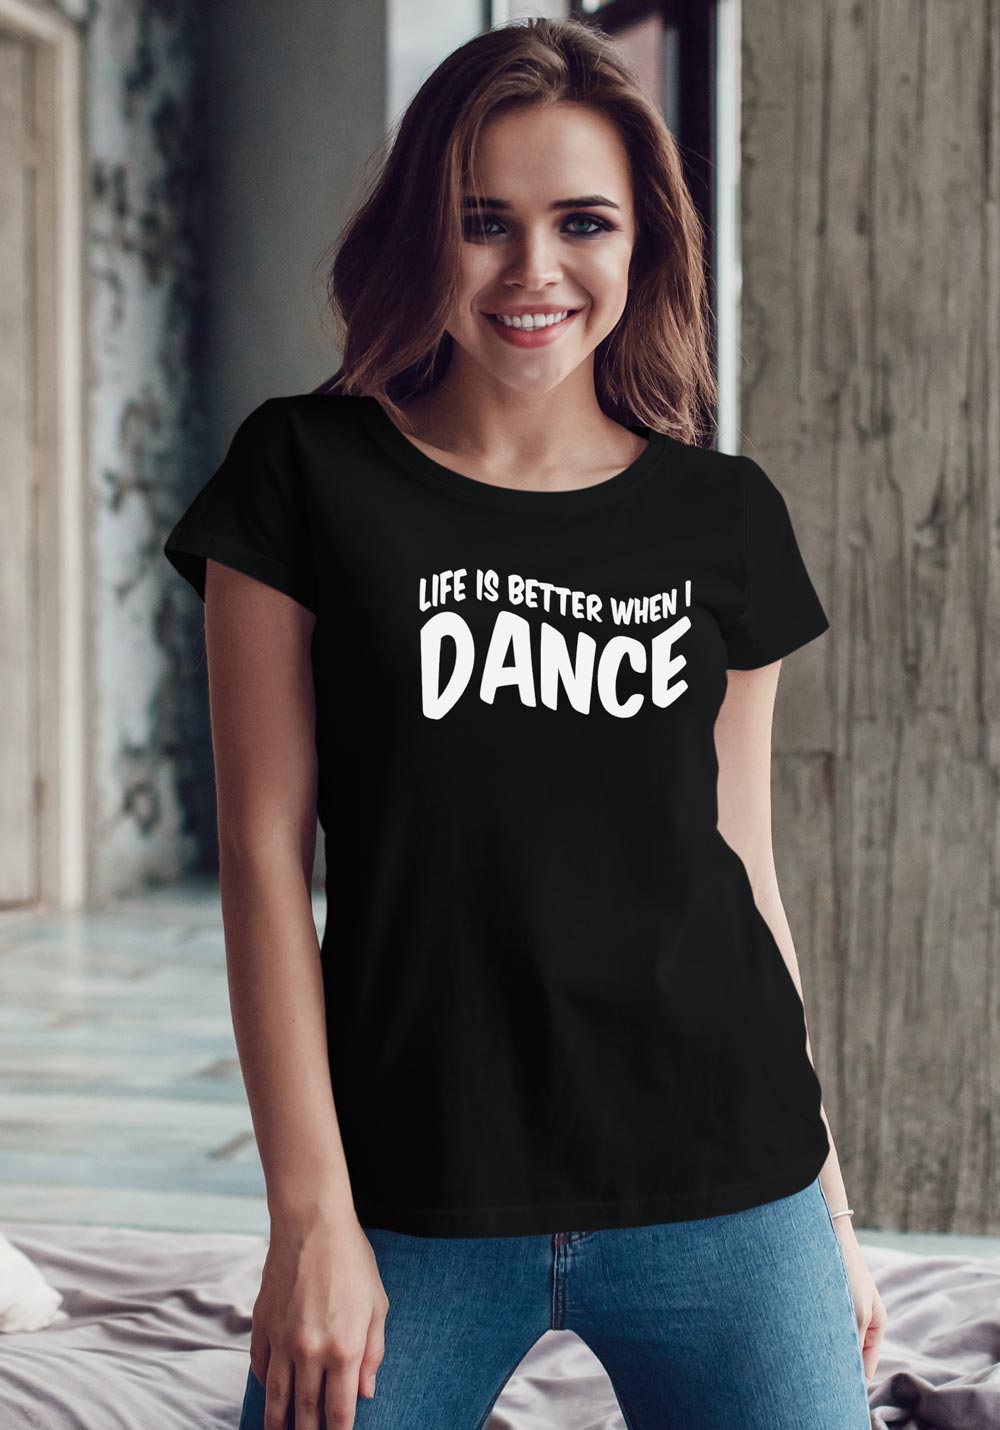 Woman wearing Zouk T-shirt decorated with unique "Life is better when I Dance" design in black crew neck style